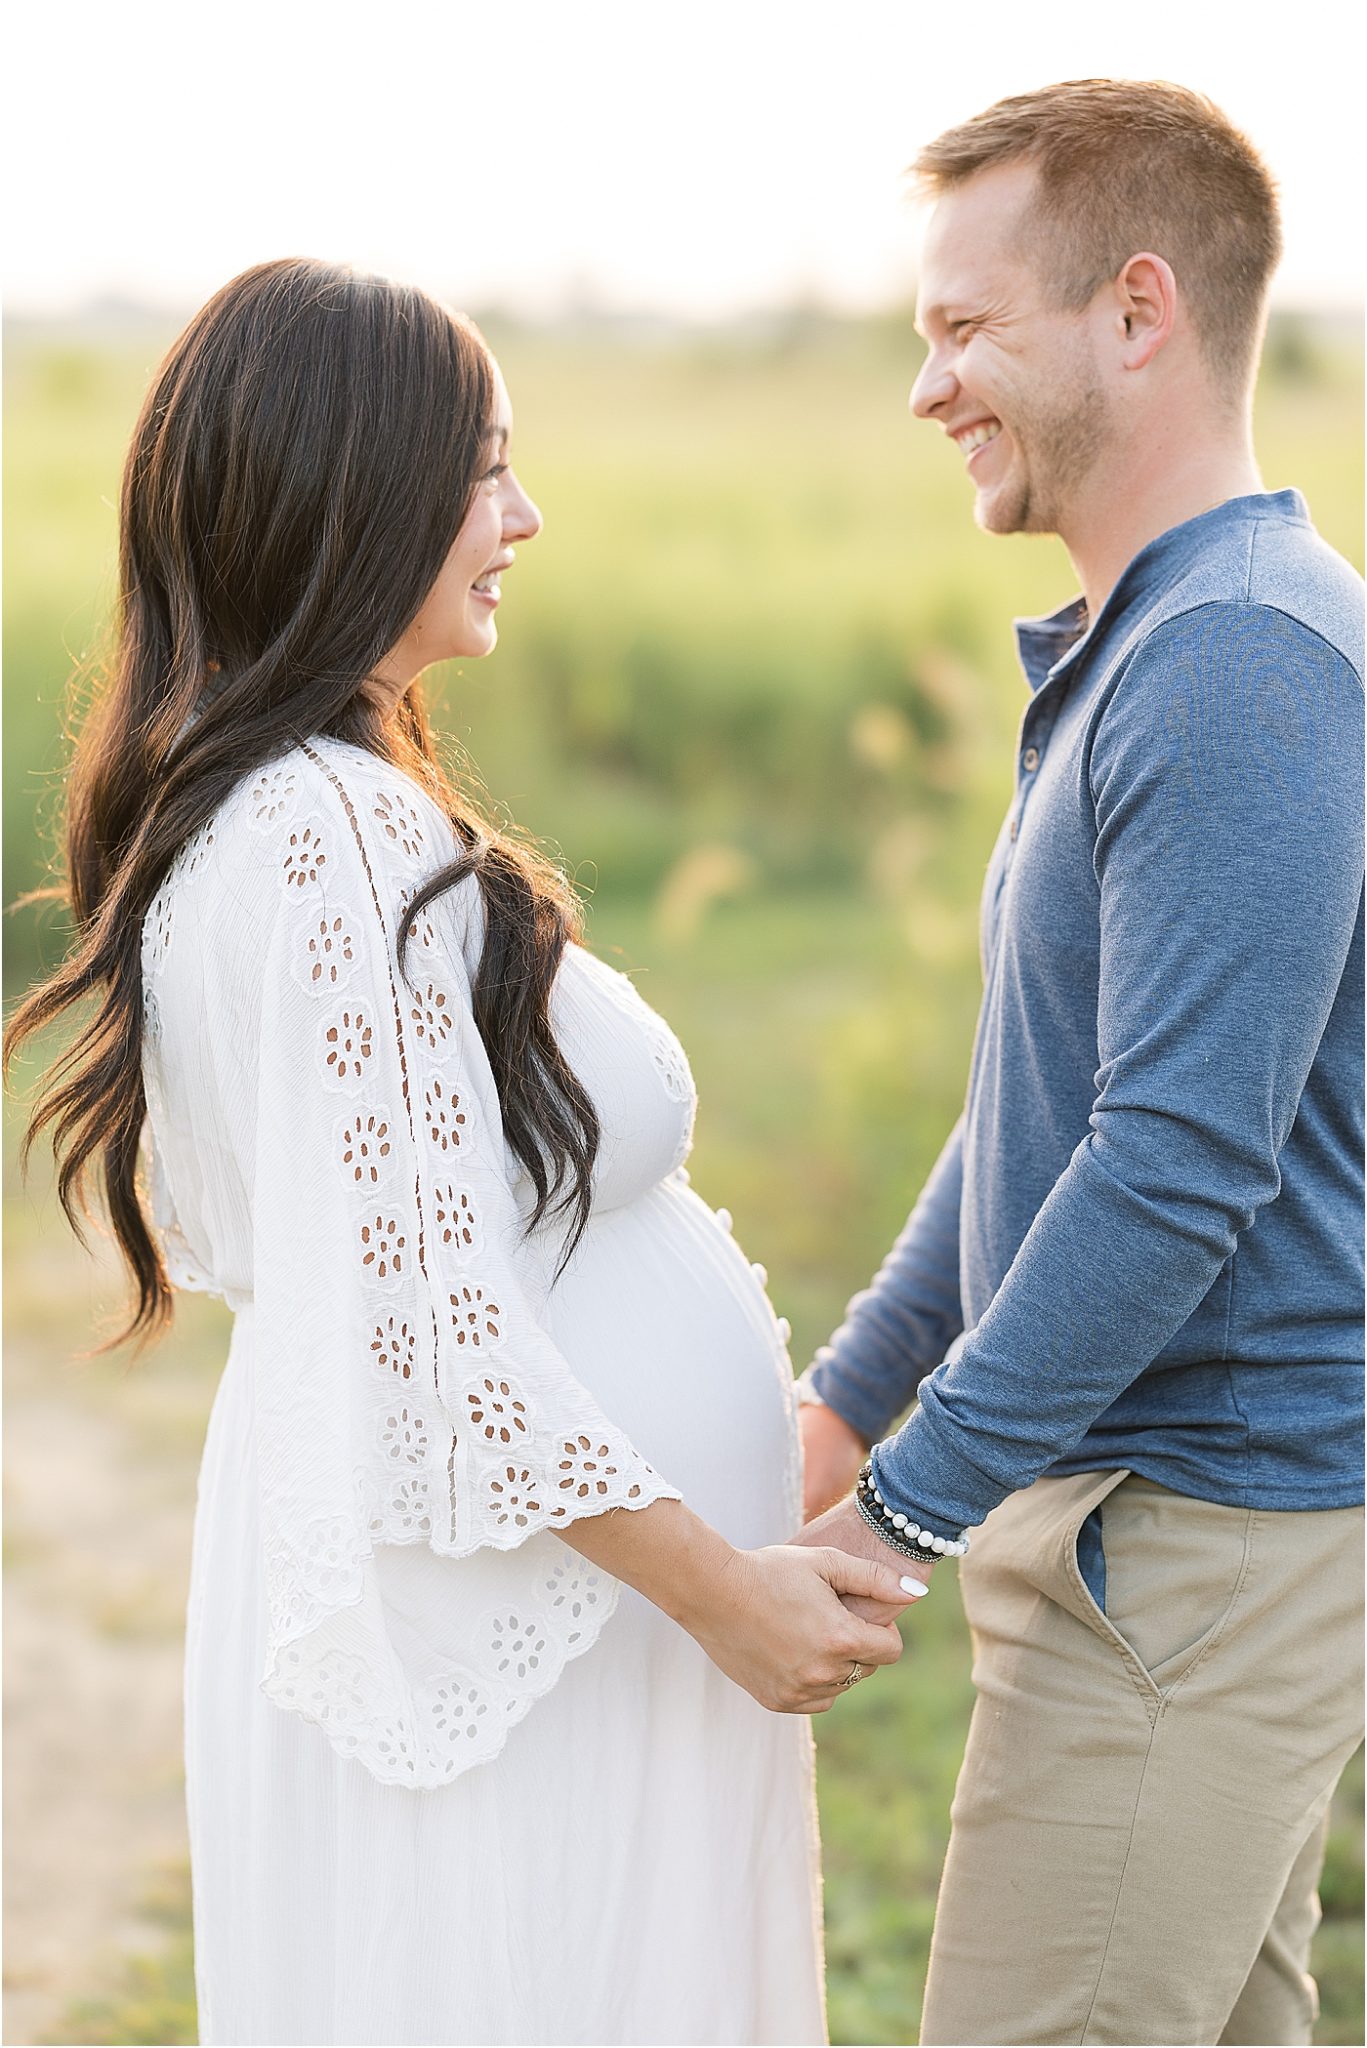 Parents-to-be looking at each other during outdoor maternity session | Photo by Lindsay Konopa Photography